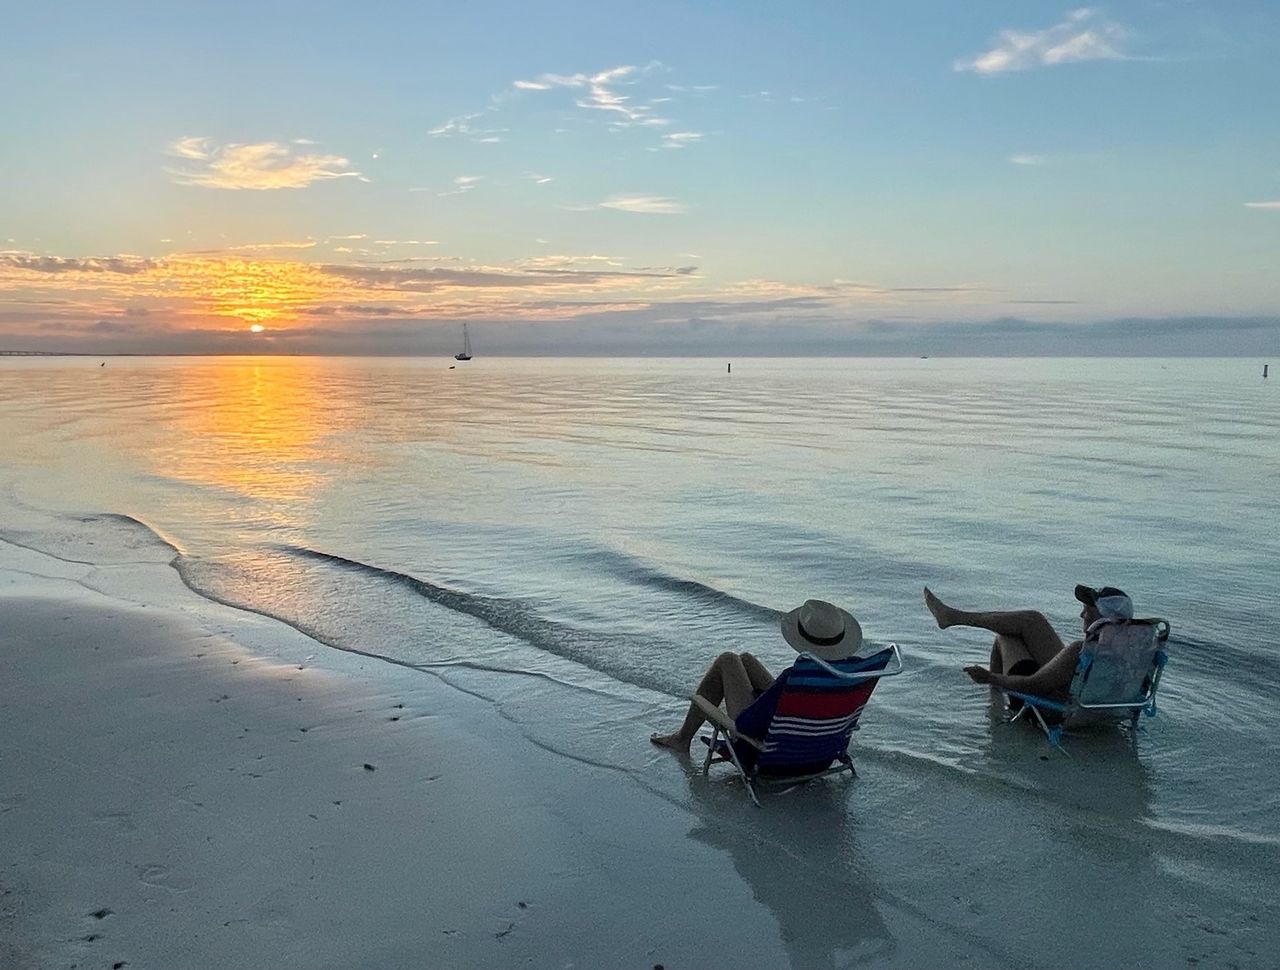 In the Florida Keys opportunities abound to experience unplugged relaxation, in-the-moment enjoyment and activities that support personal wellness. Photo: Andy Newman